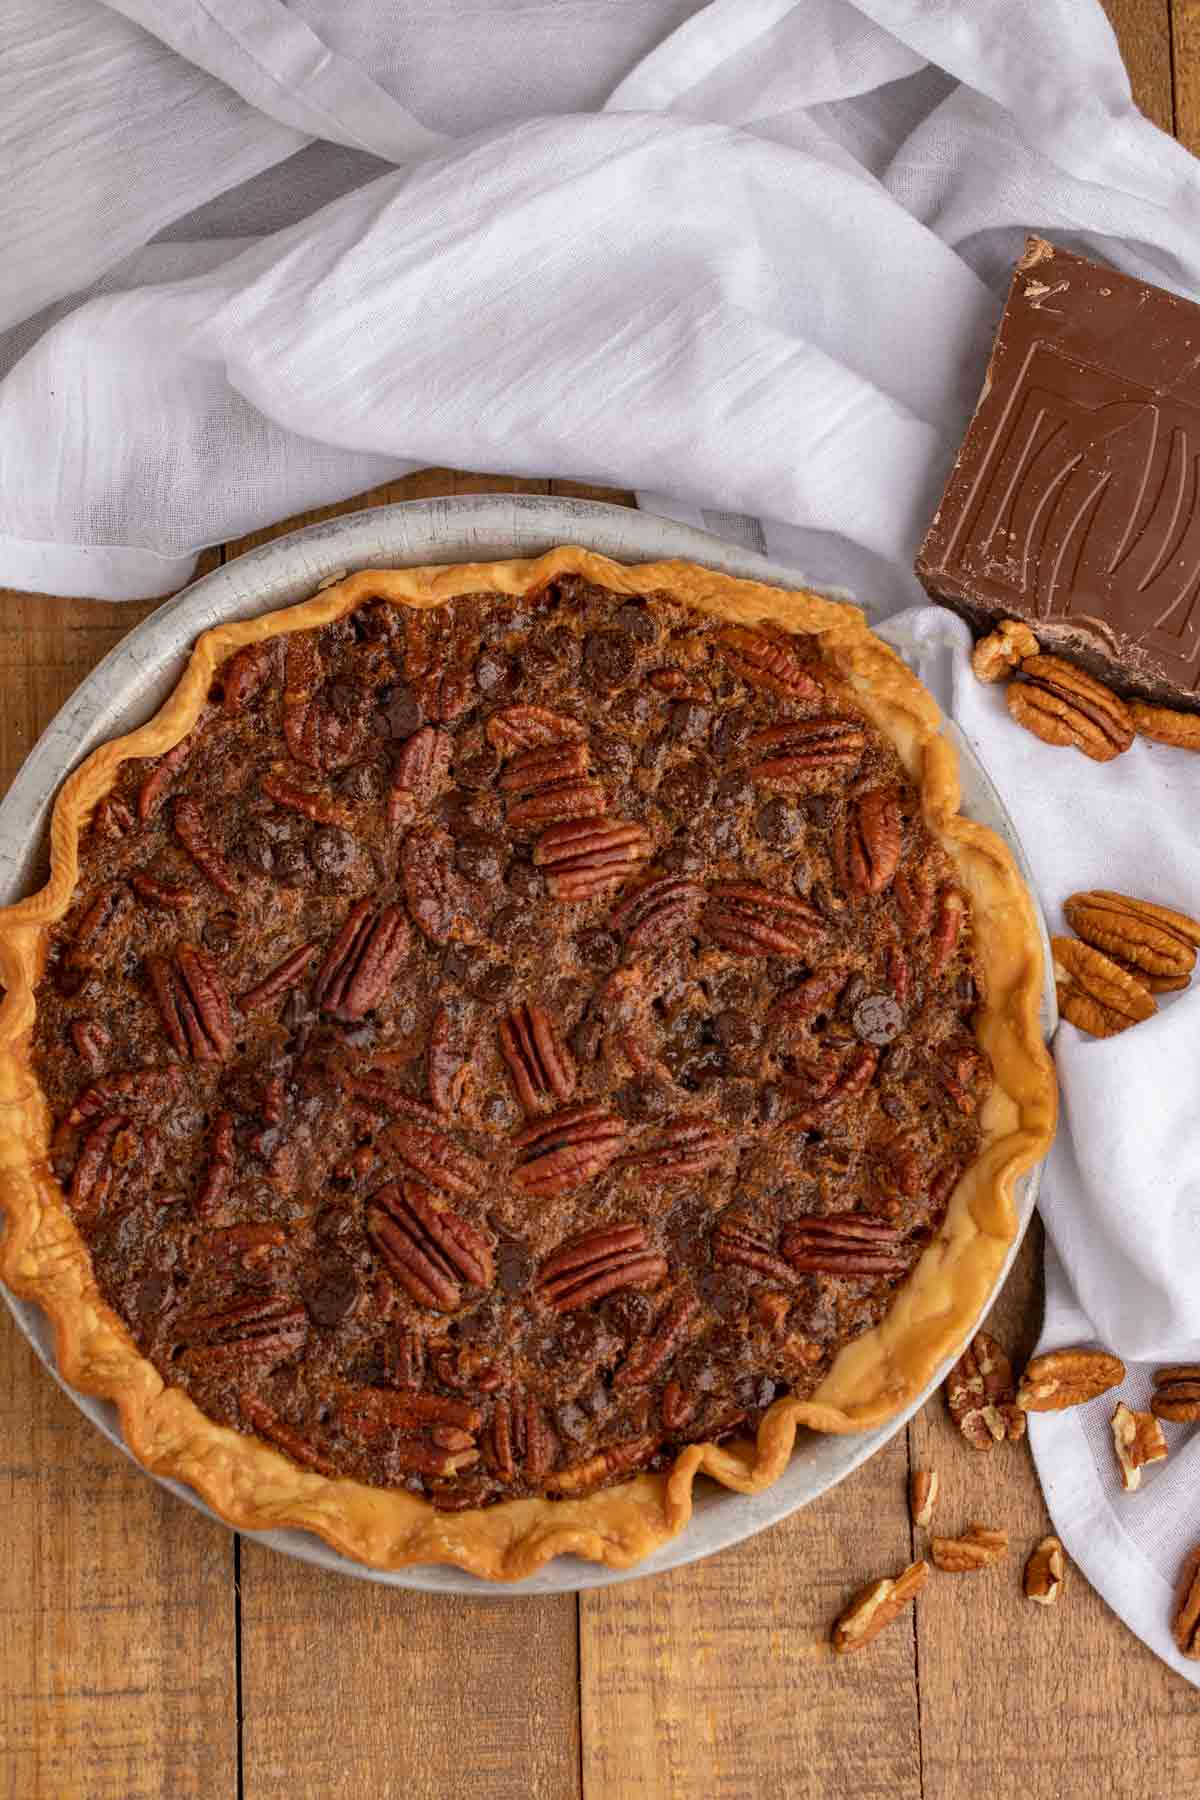 Rich and EASY Chocolate Pecan Pie - PERFECT Holiday Pie Recipe